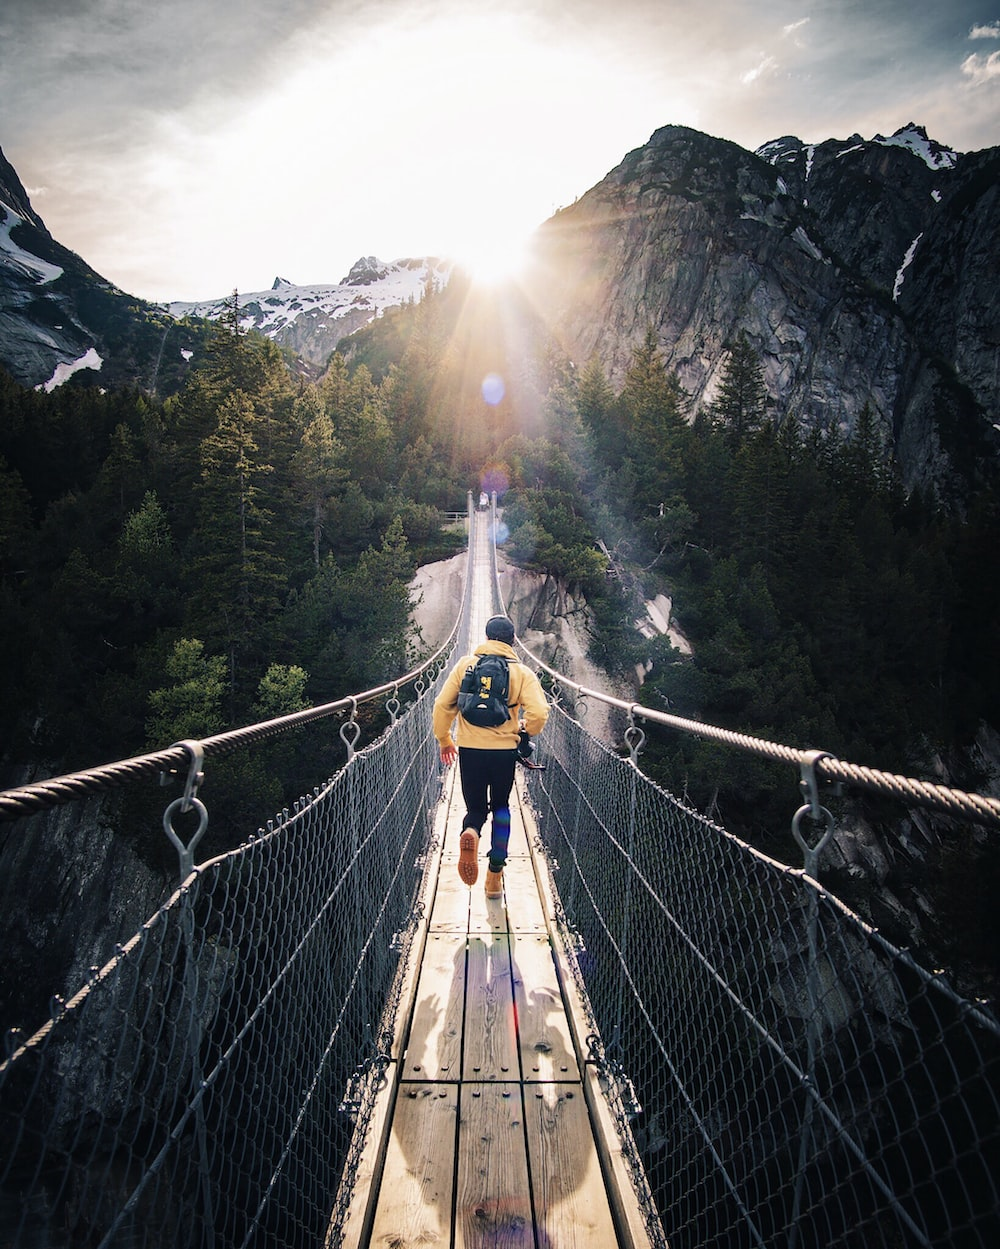 A man hiking across a suspension bridge in the mountains, exploring magnificent camping destinations along the way.